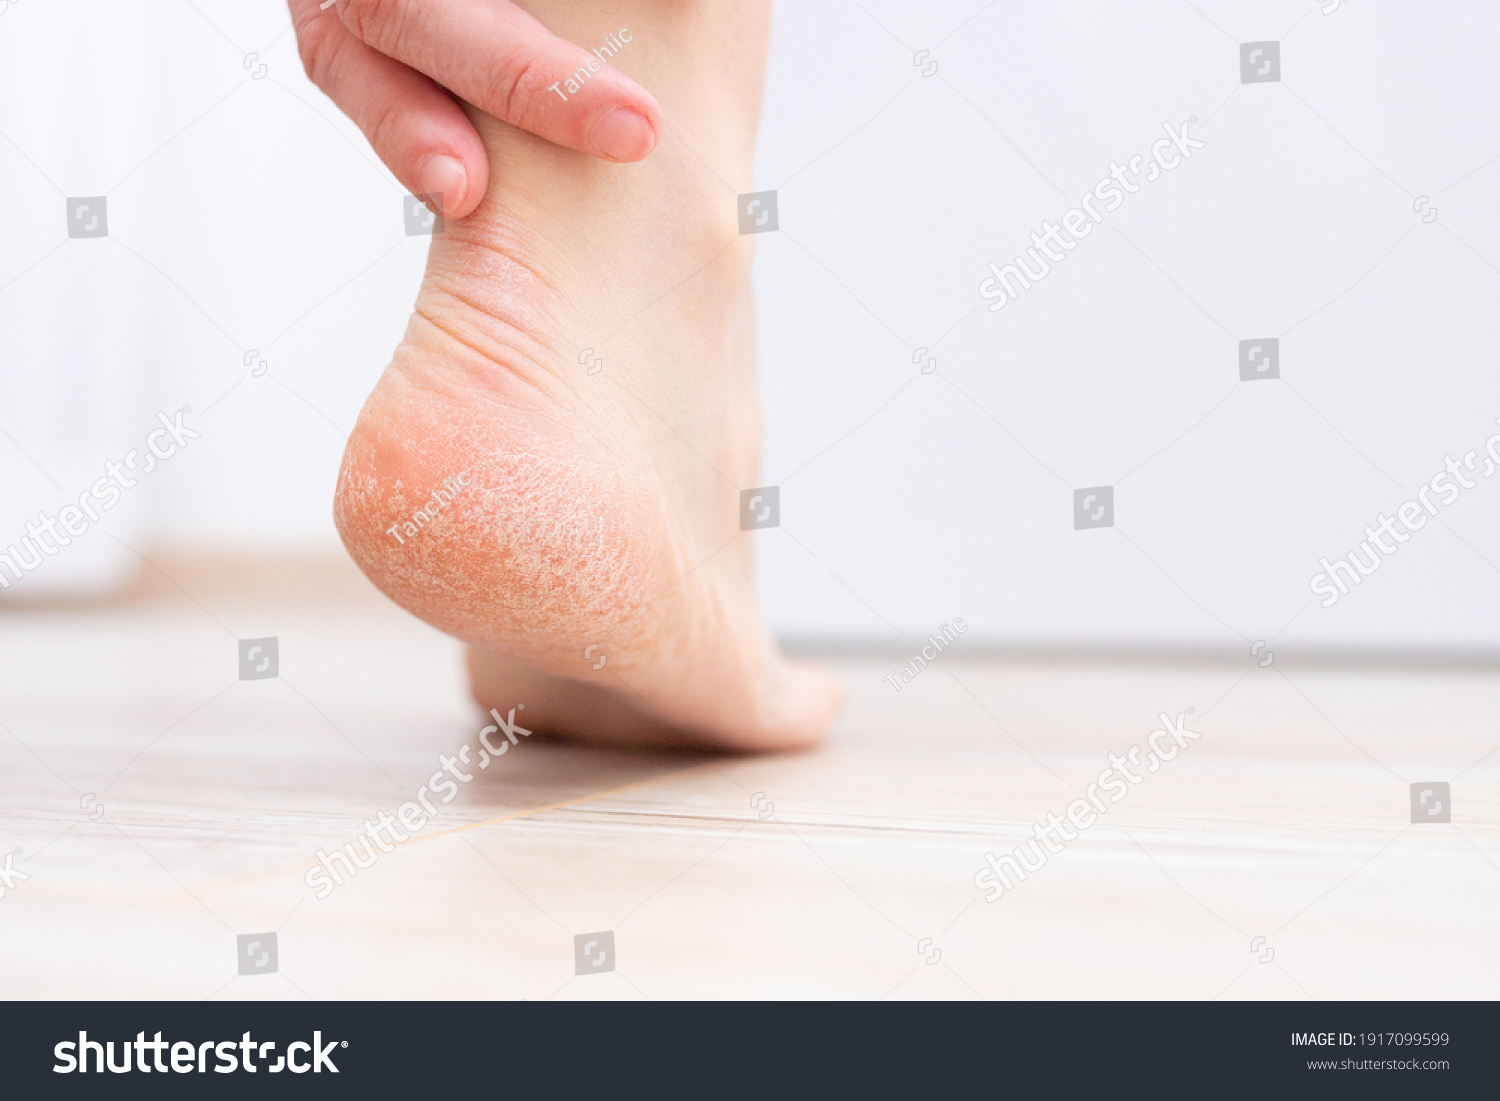 The dry skin on the heel is cracked. Treatment concept with moisturizing creams and exfoliation for healing wounds and pain when walking. Dehydrated skin on the heels of female feet #1917099599